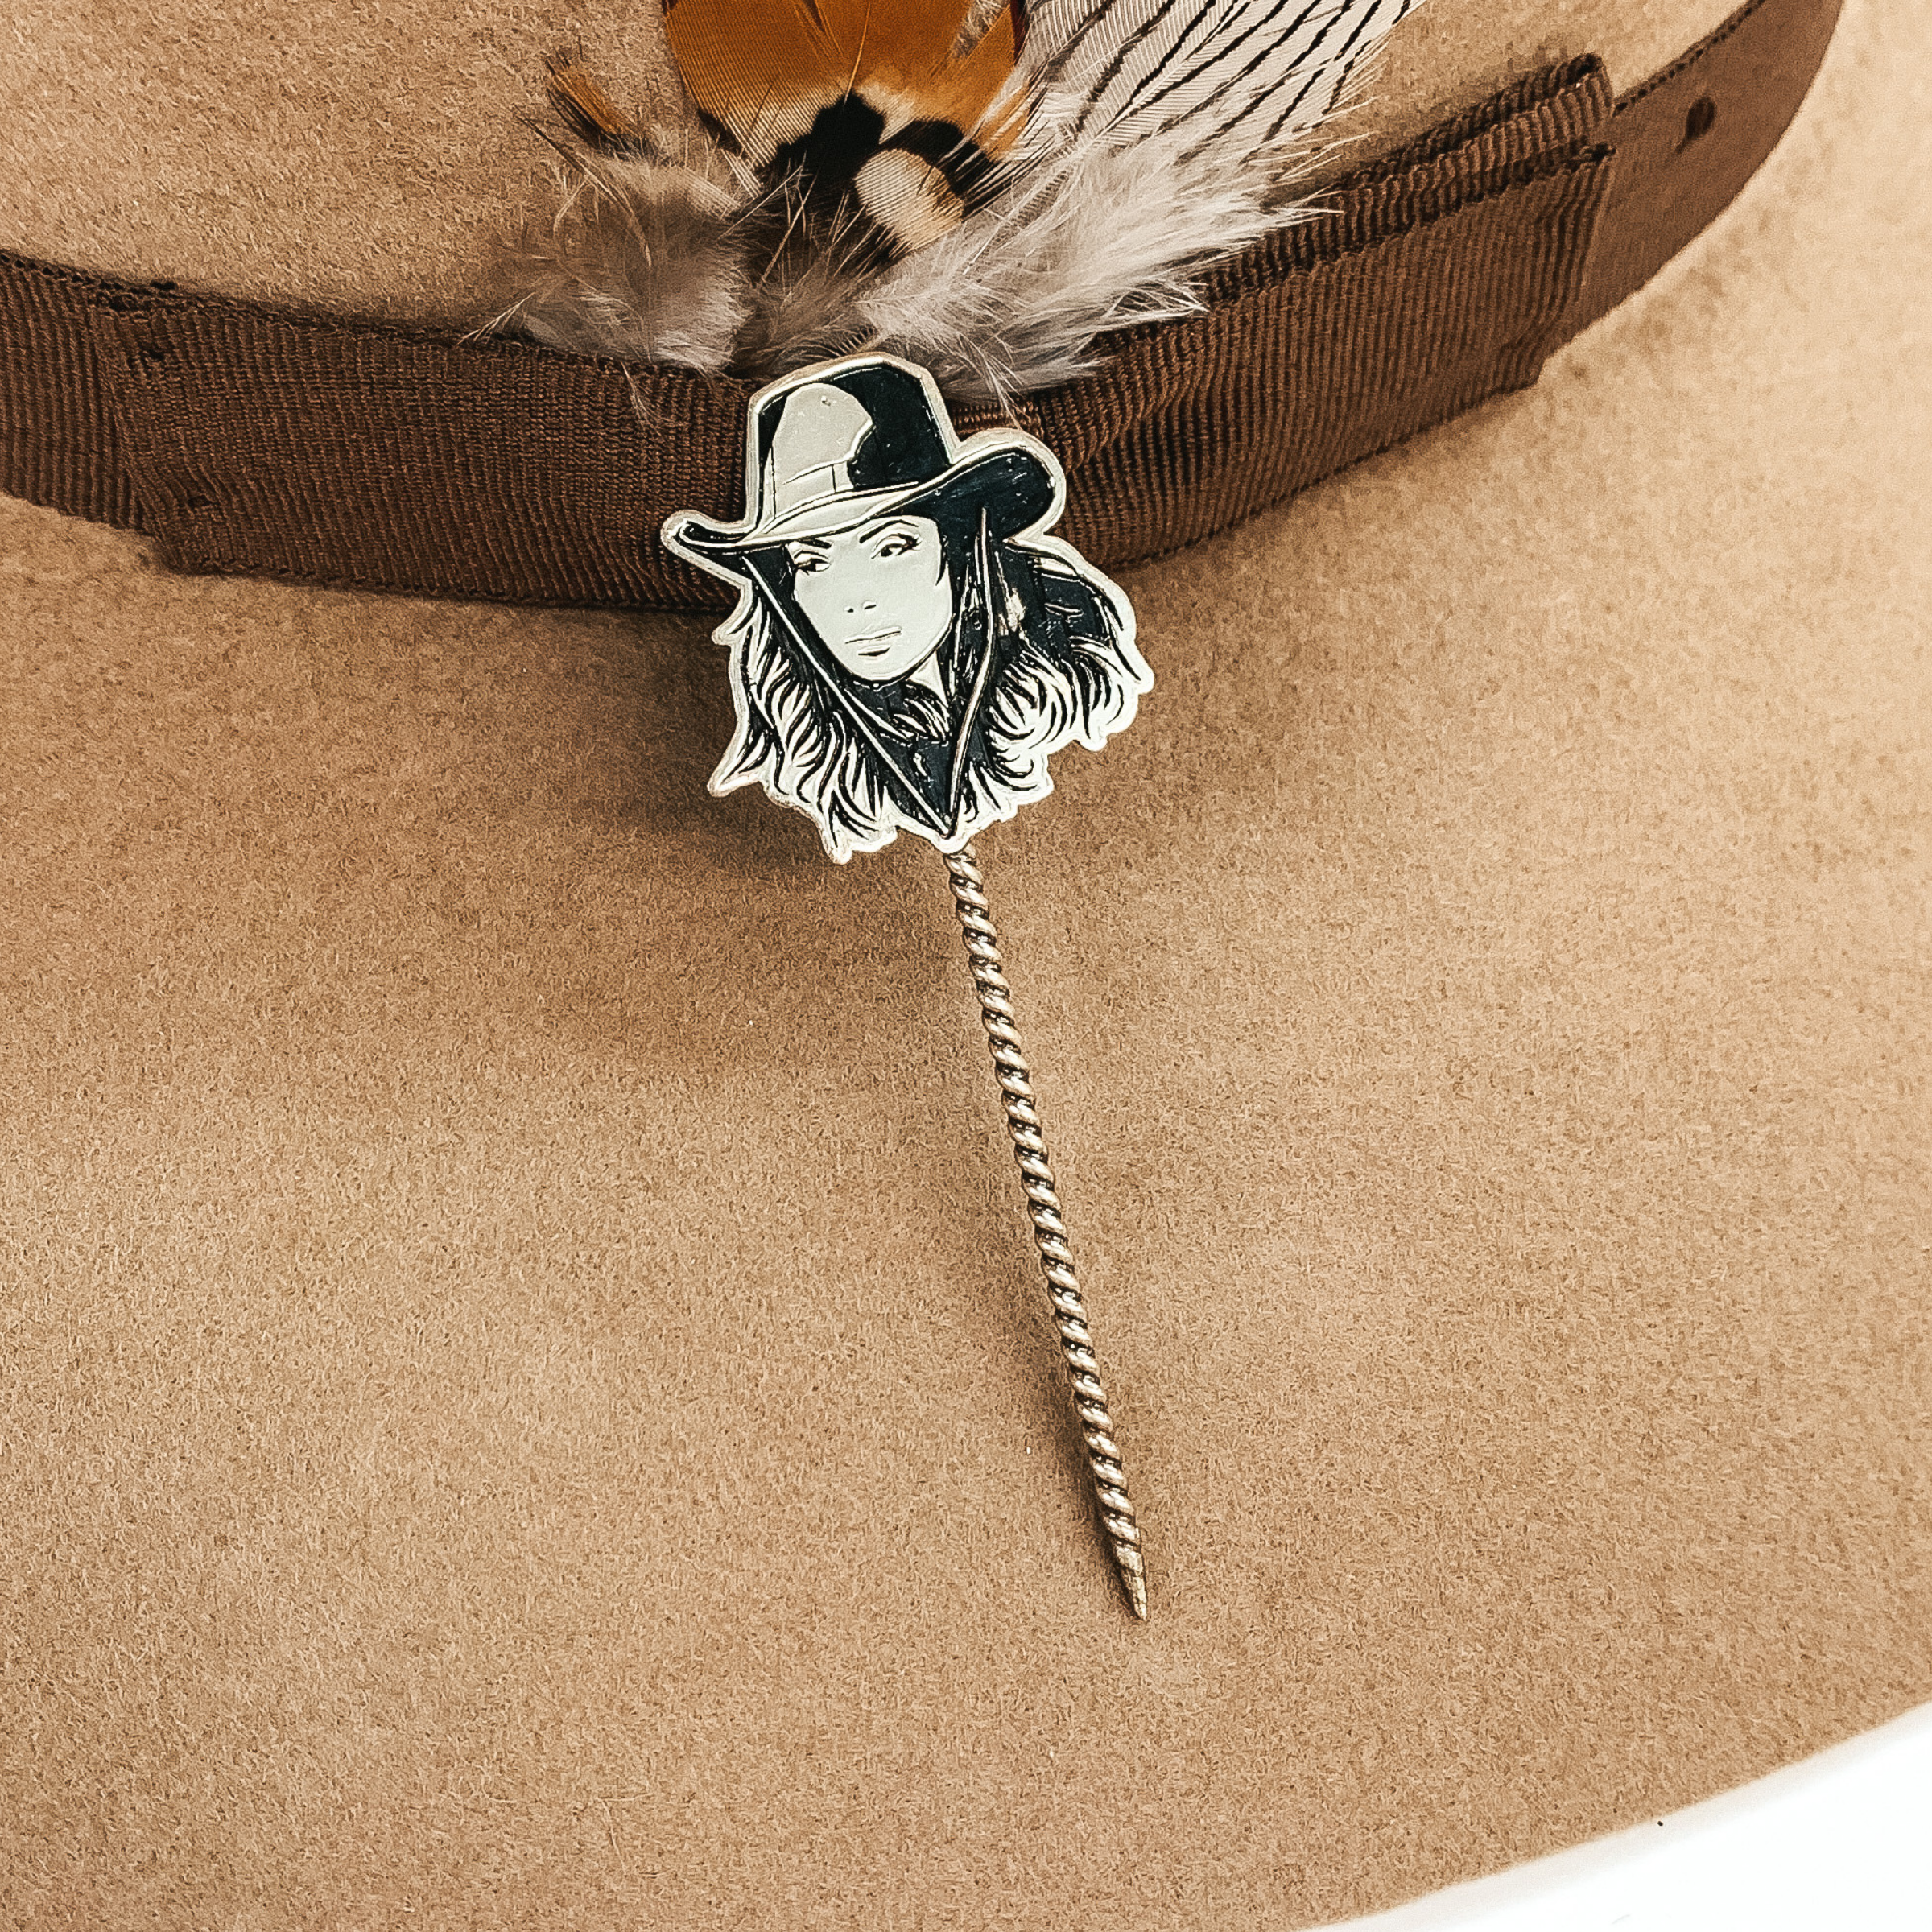 Silver twisted toothpick hat pin with a silver pendant of a cowgirl's face. The pendant includes a hat on the girls head. This hat pin is pictured on a tan hat.